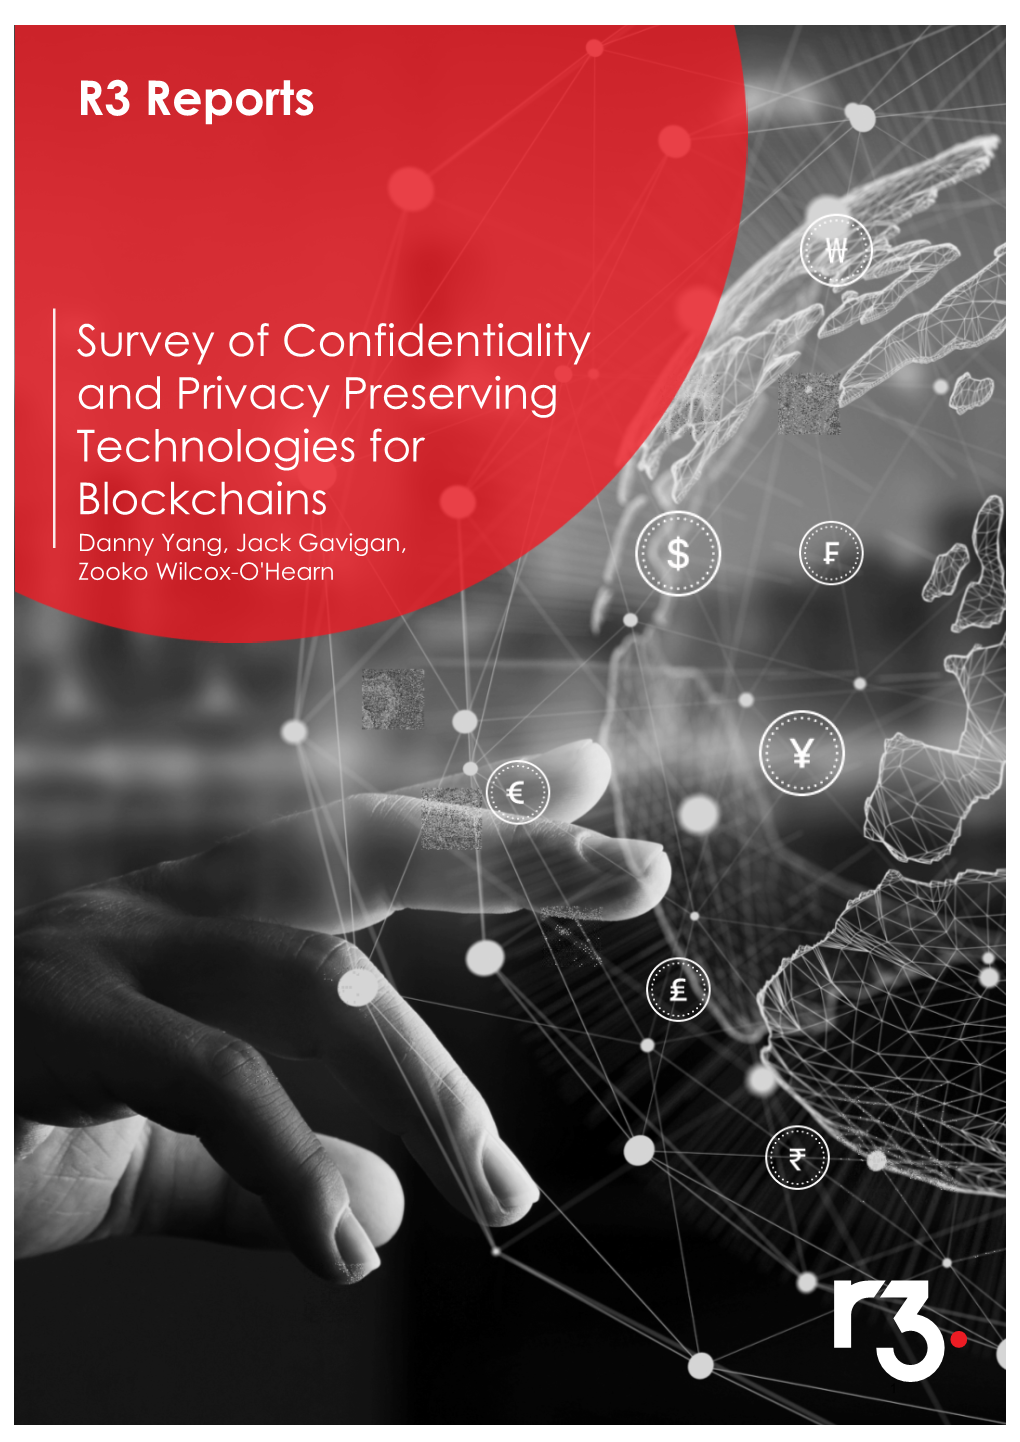 Survey of Confidentiality and Privacy Preserving Technologies for Blockchains Danny Yang, Jack Gavigan, Zooko Wilcox-O'hearn